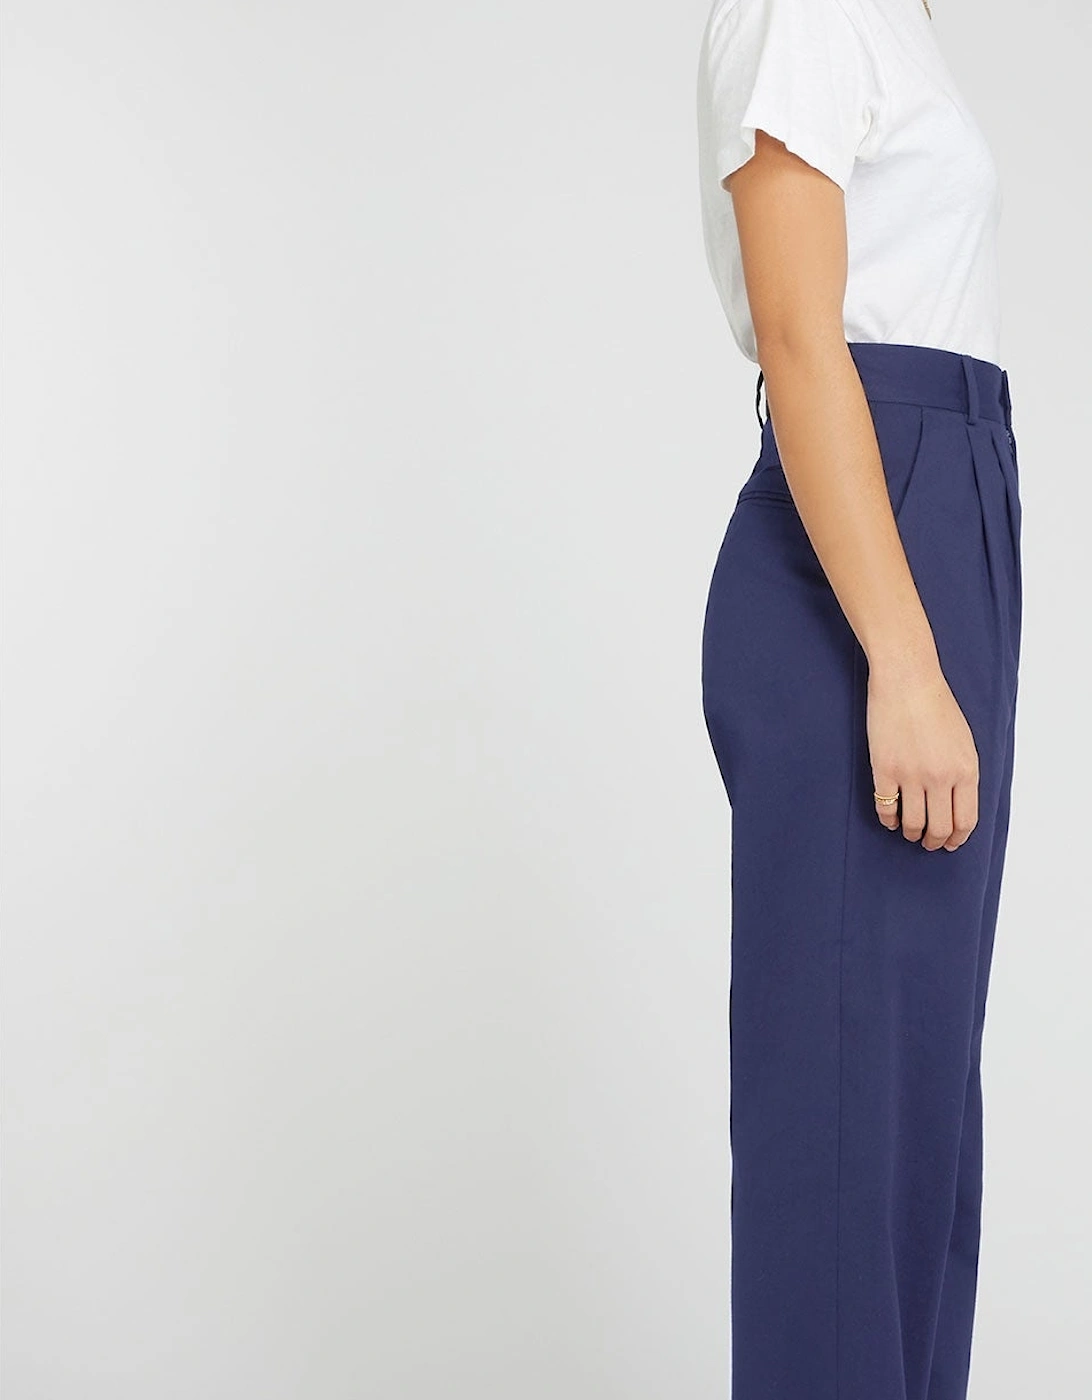 Cinnamon Relaxed Trousers in Navy